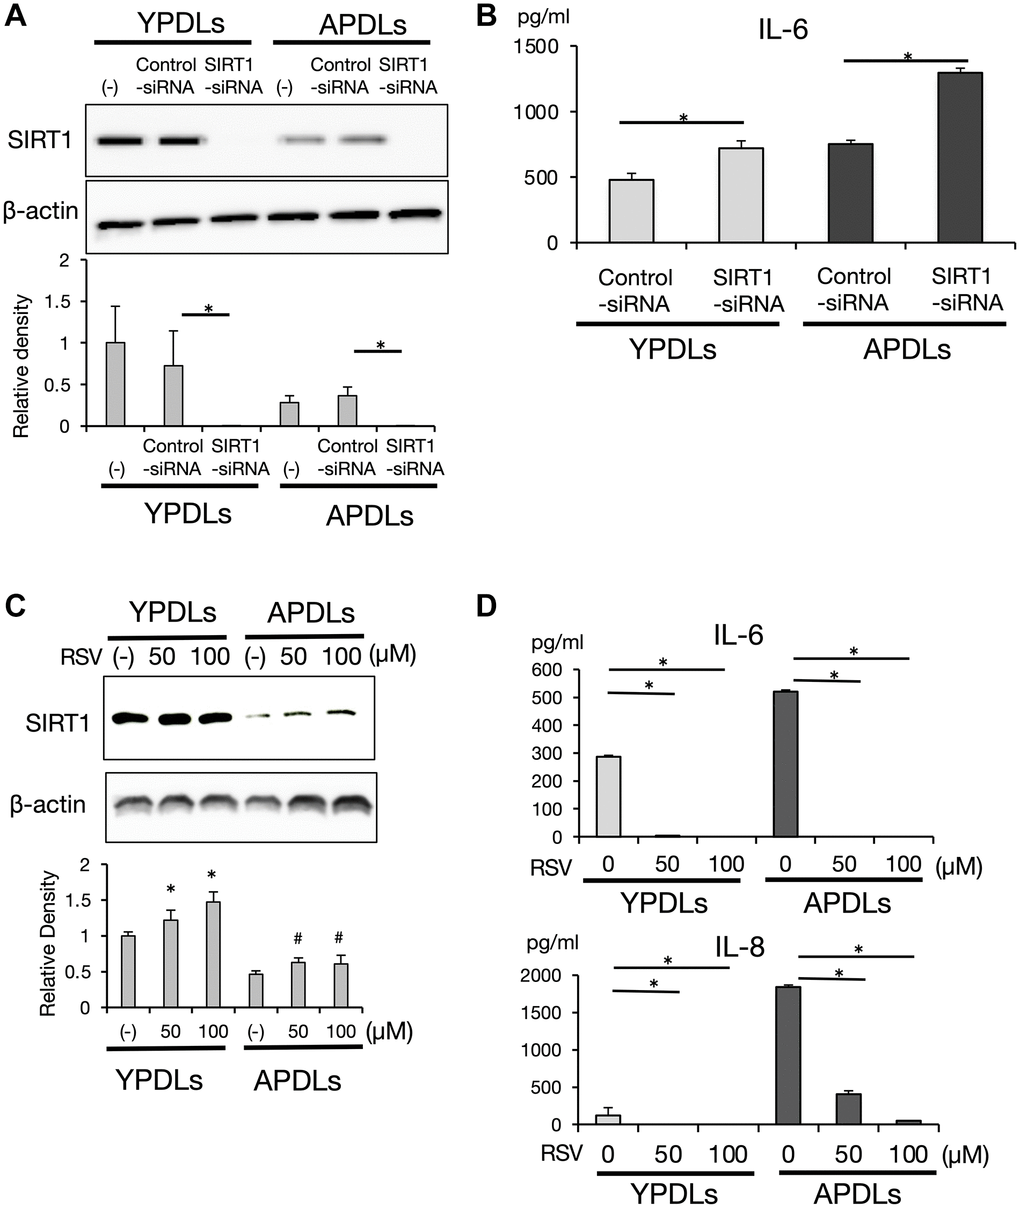 SIRT1 regulates IL-6 production in senescent HPDL cells. (A) Expression of SIRT1 after si-SIRT1 or si-control transfection into YPDLs and APDLs. Β-Actin was used as a loading control and the relative protein levels were quantified (*p B) Expression of IL-6 after si-SIRT1 or control transfection into YPDLs and APDLs. IL-6 production from YPDLs and APDLs was measured by an ELISA (*p C) Expression of SIRT1 after SIRT1 activator, resveratrol treatment, at the protein level measured by western blotting. Β-Actin was used as a loading control and the relative protein levels were quantified (*p #P D) IL-6 and IL-8 productions from YPDLs and APDLs after resveratrol treatment (0, 50 and 100 μM) (*p 